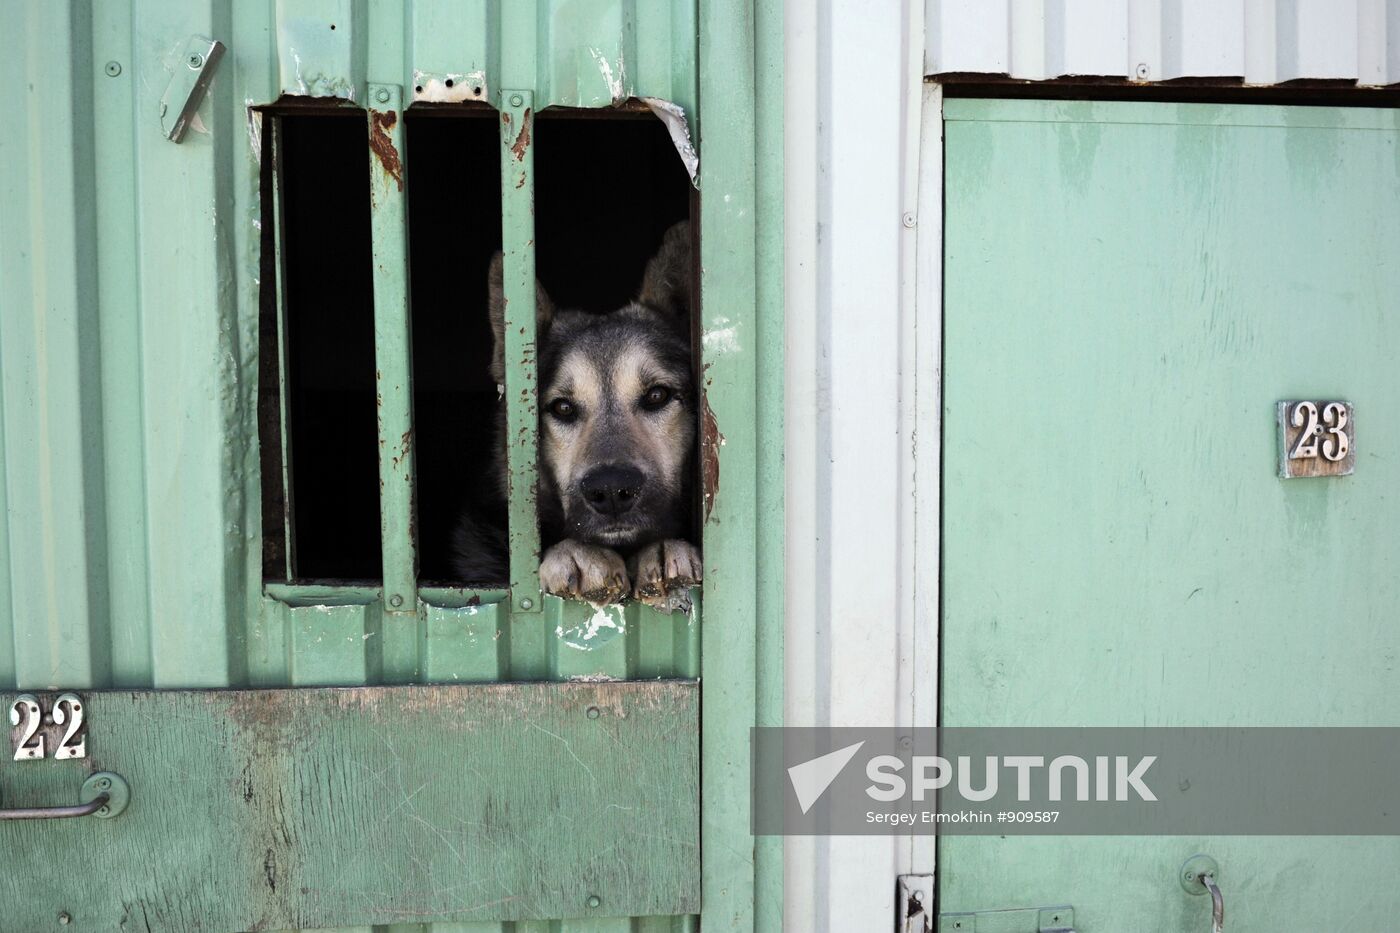 Capturing and vaccination of stray dogs in St. Petersburg